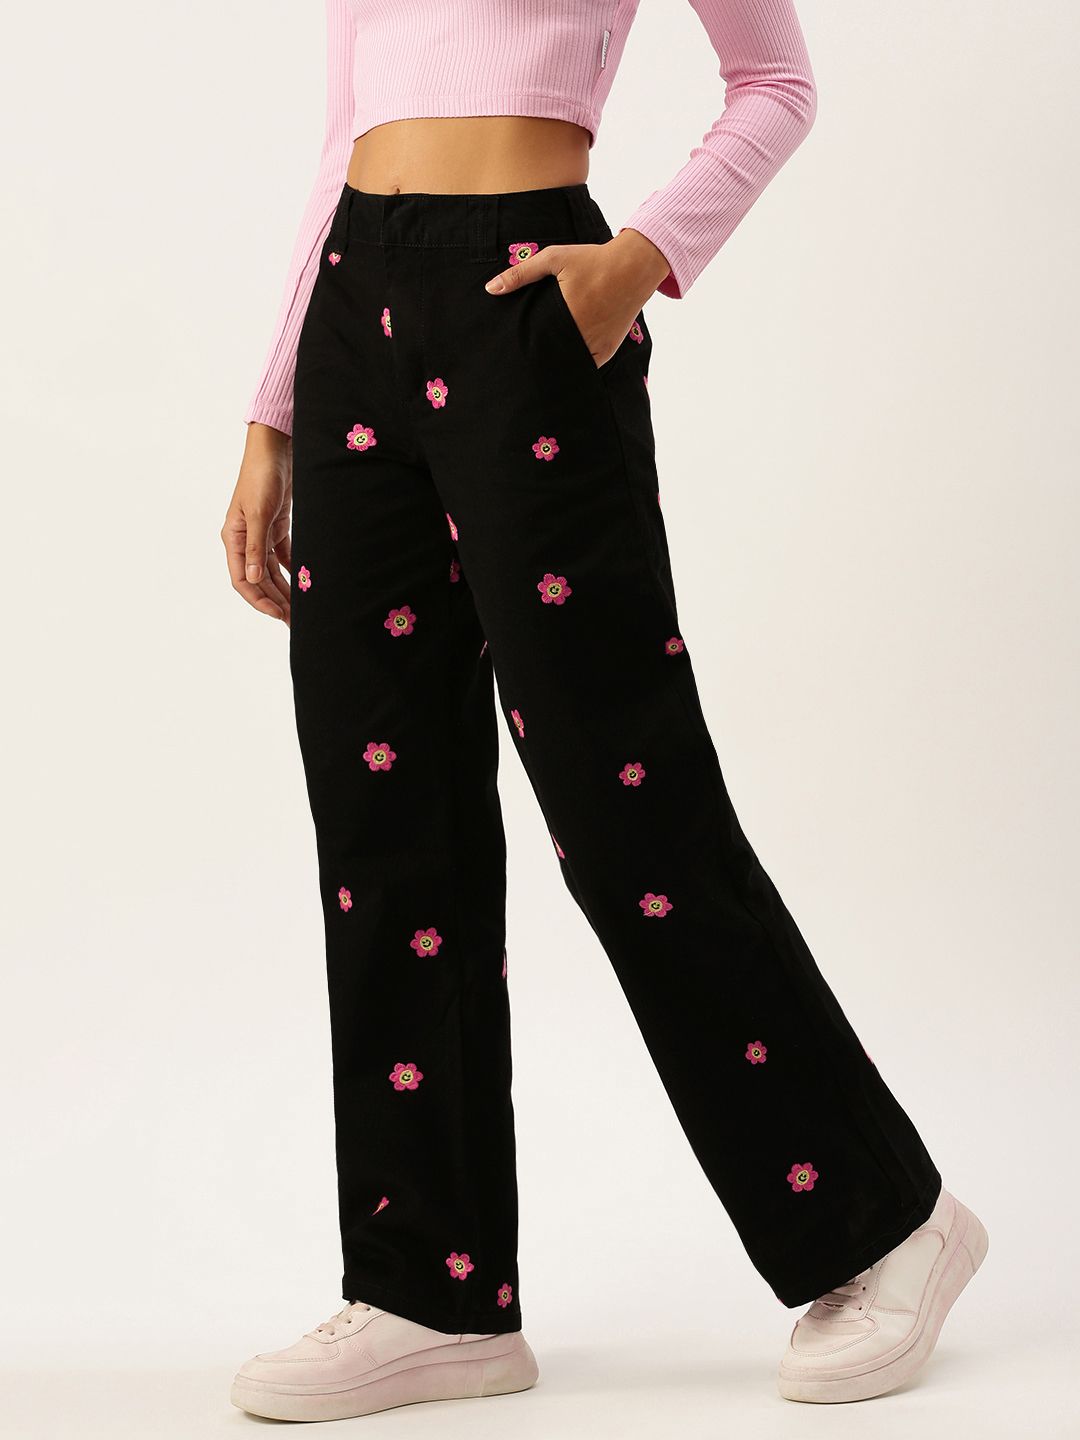 FOREVER 21 Women Black & Pink Printed Jeans Price in India